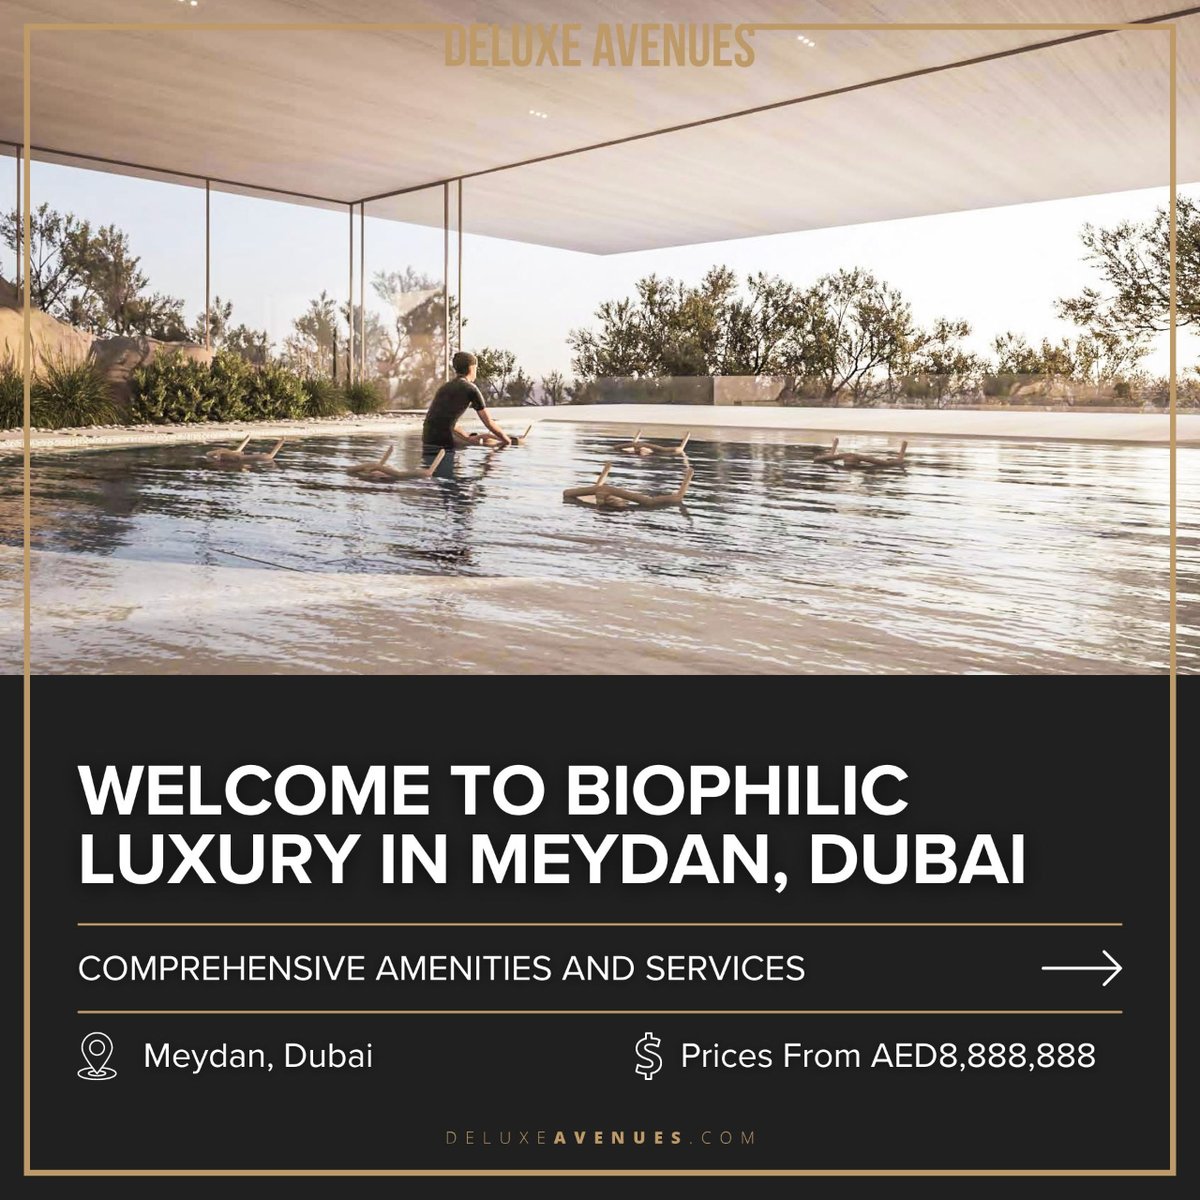 Nestled in #Meydan with direct access to #Downtown in just 9 minutes, #KeturahReserve offers unmatched accessibility amidst Dubai’s bustling heart.

👉 Learn more at davenues.com/dubai/keturah/…

#LuxuryLiving #DeluxeAvenues #RealEstate #Dubai #DubaiRealEstate #DubaiAvenues